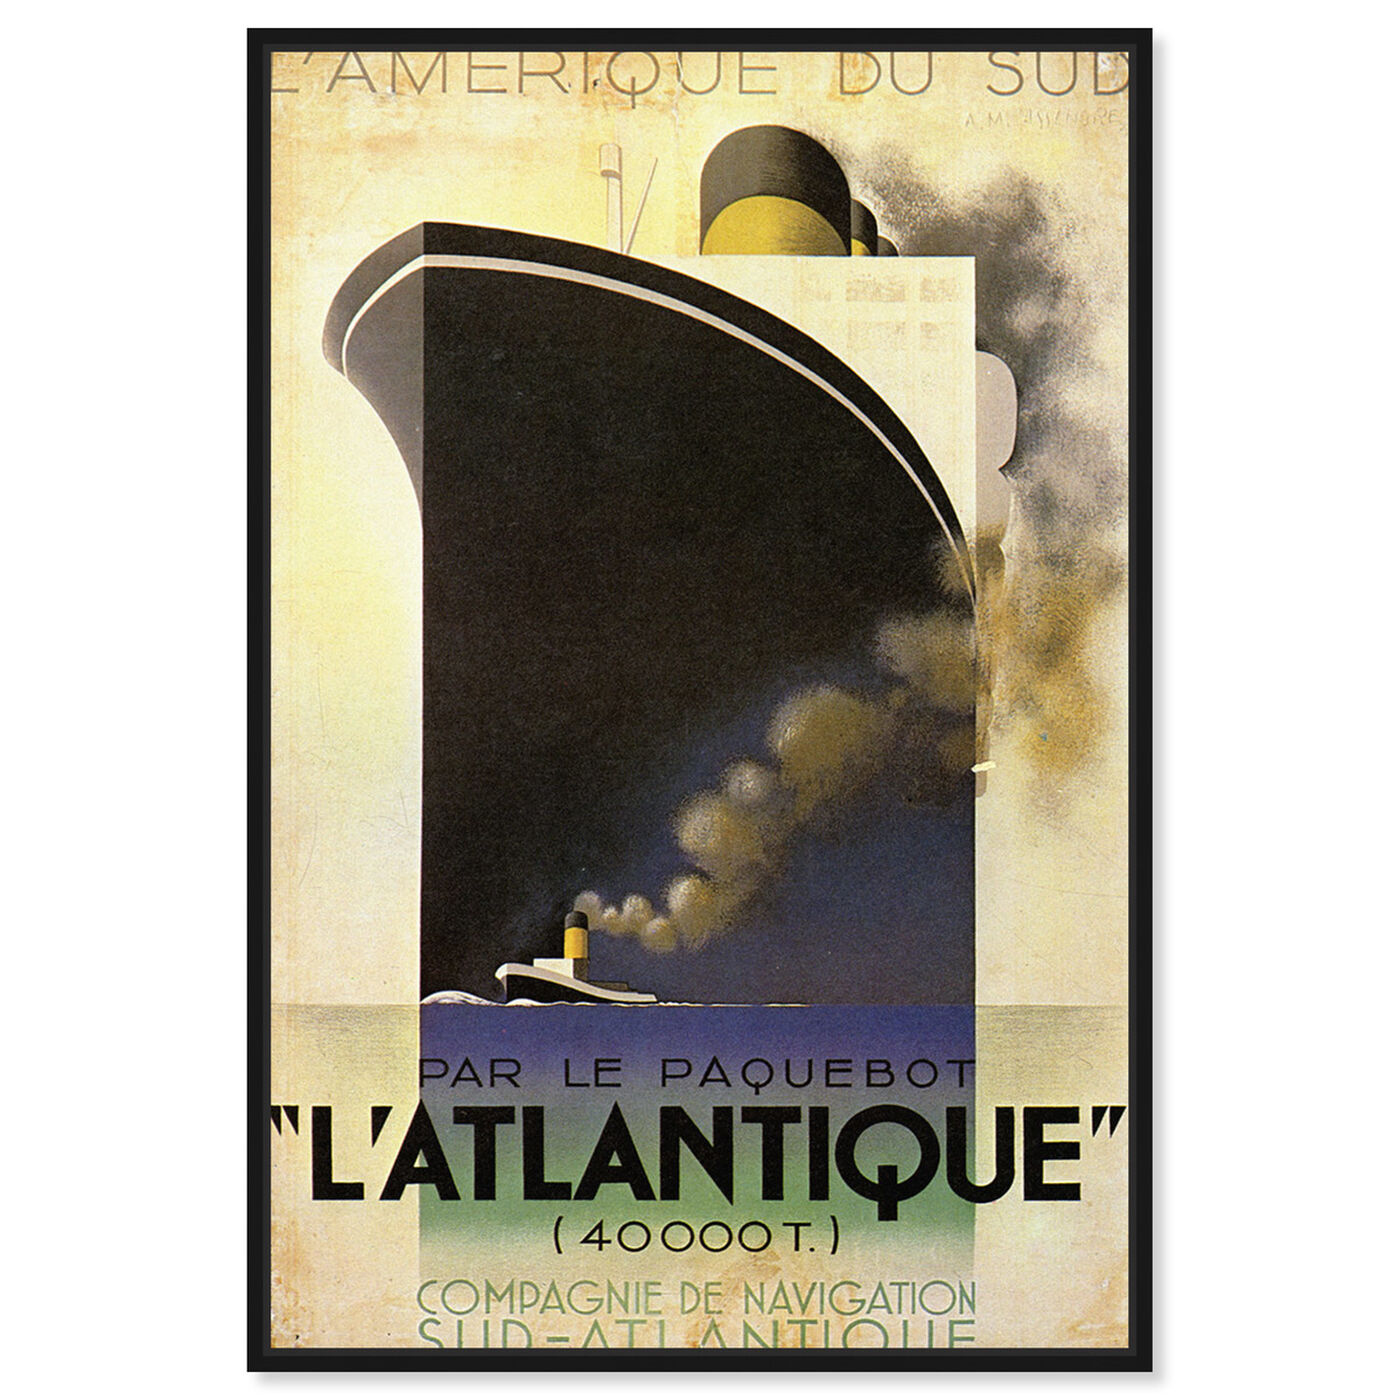 Front view of Atlantique featuring advertising and posters art.